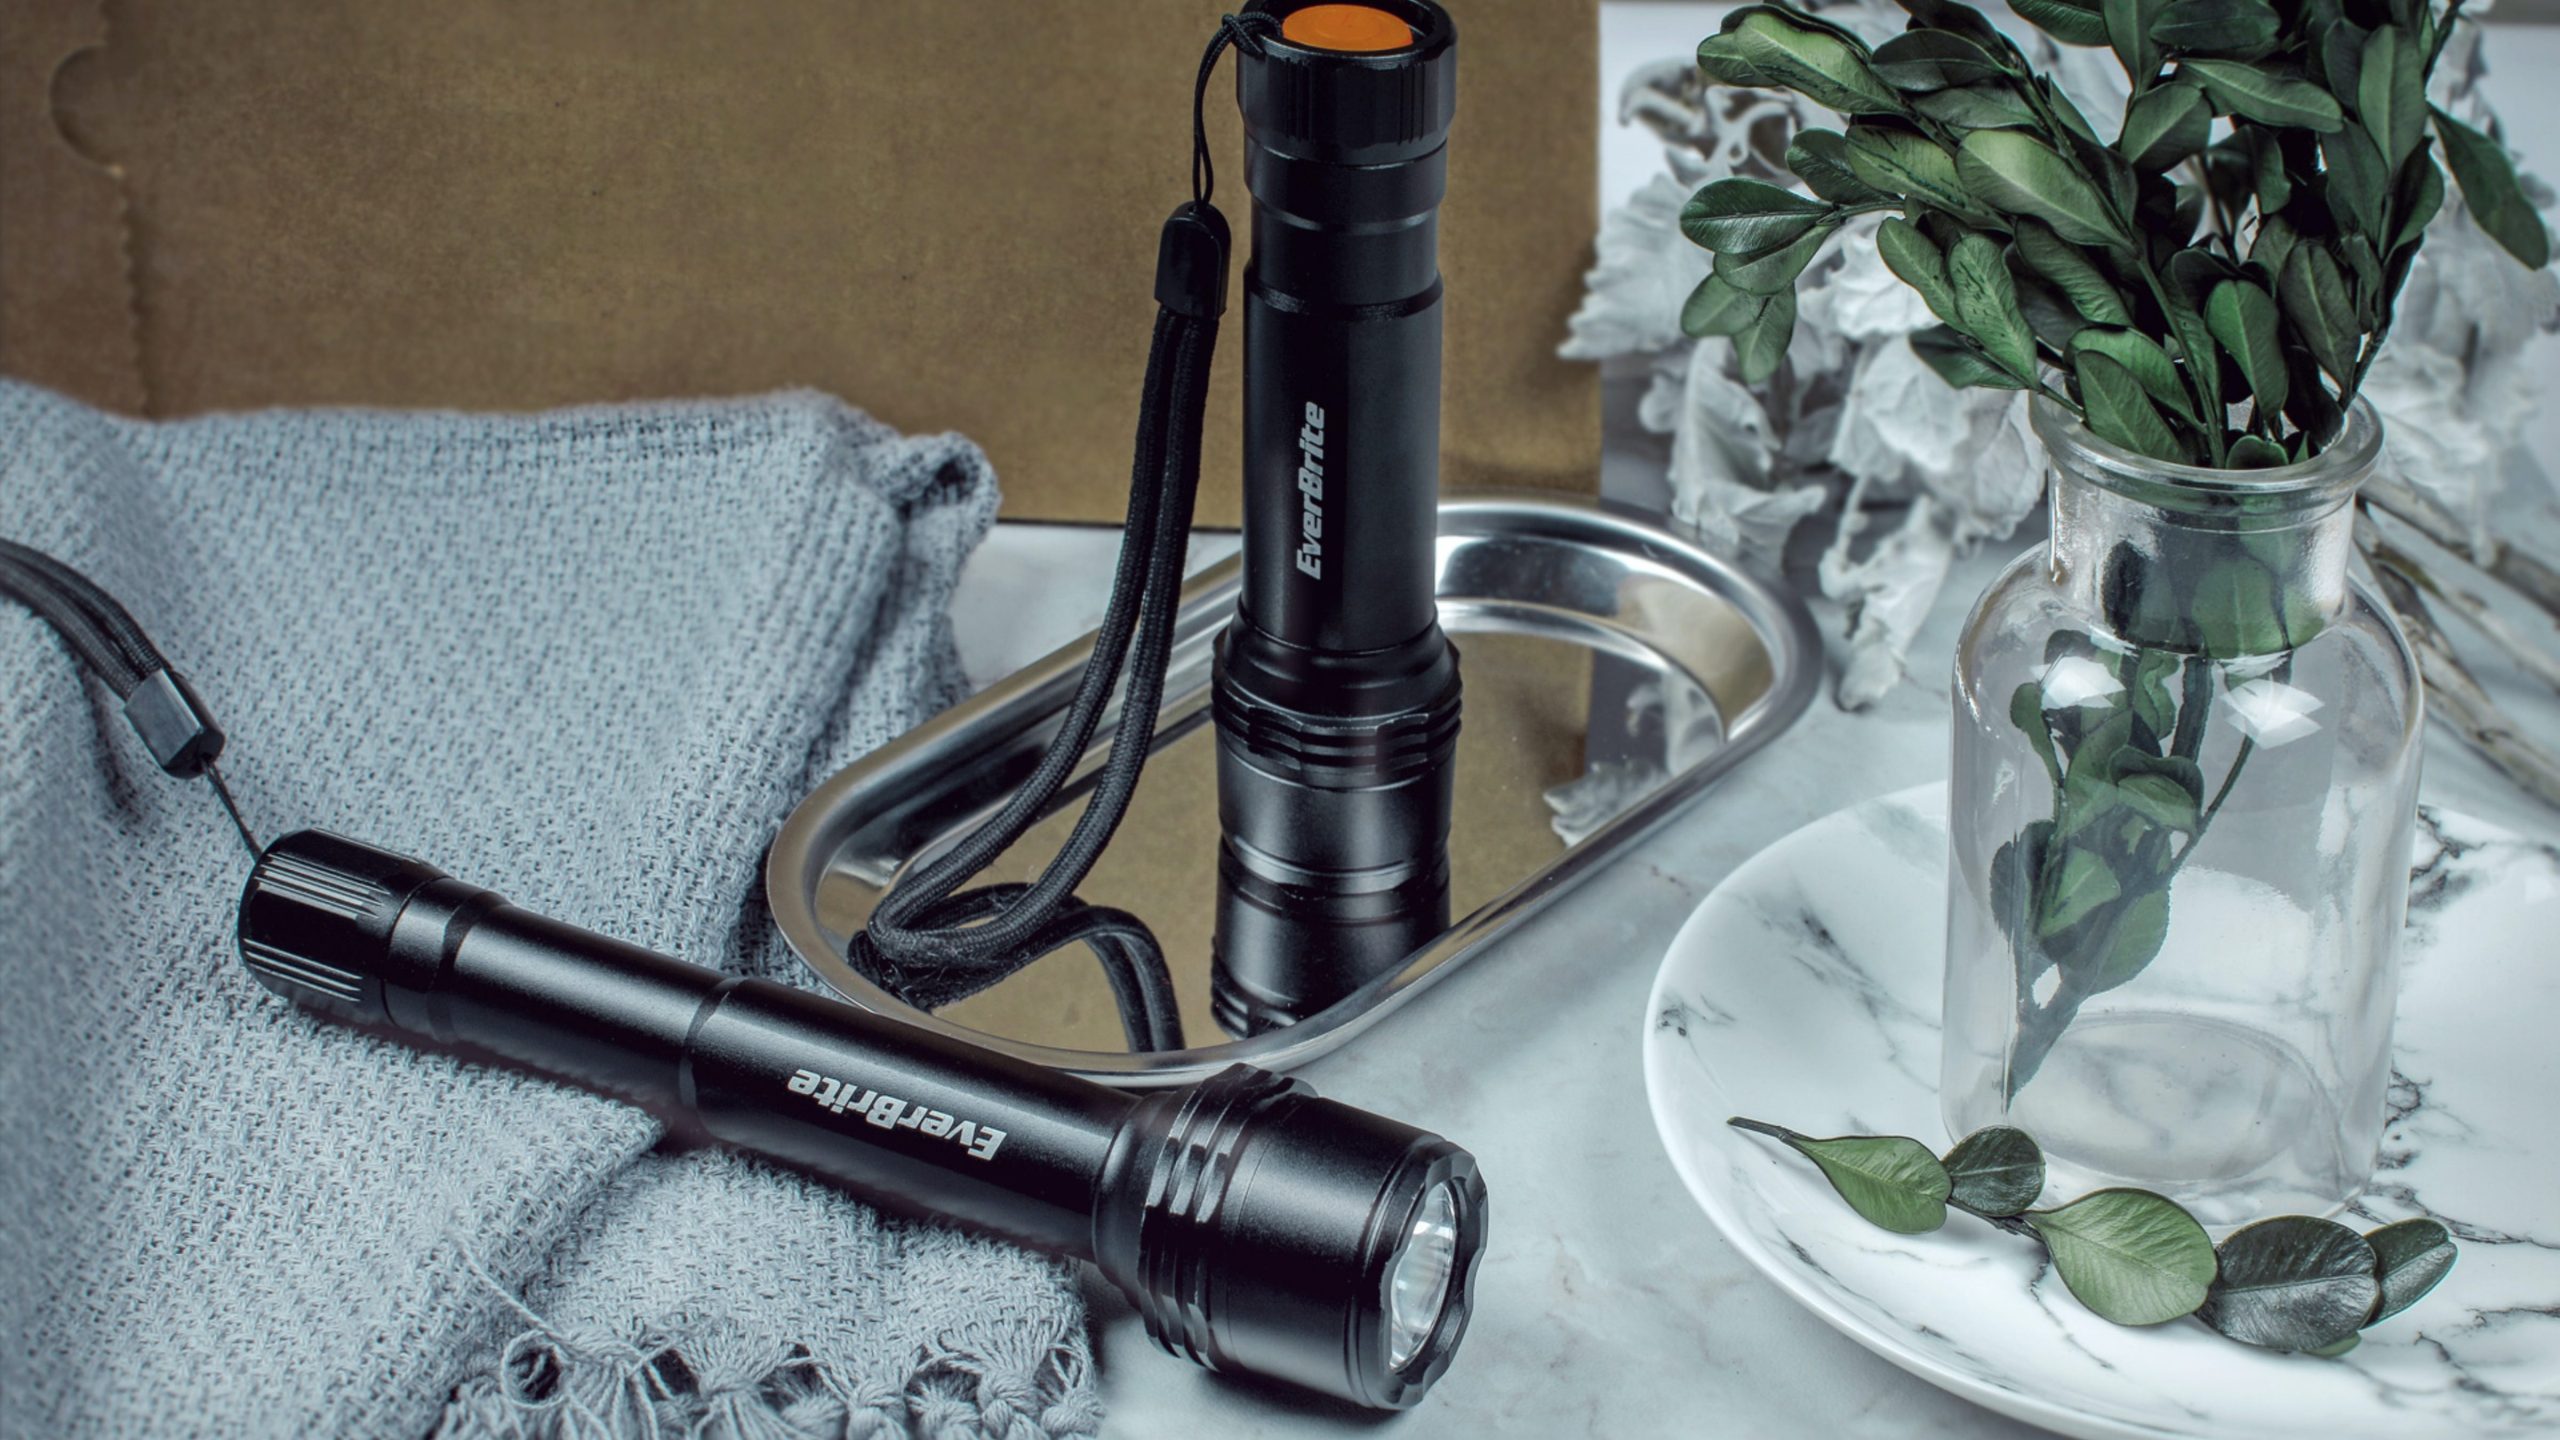 Lampe torche rechargeable